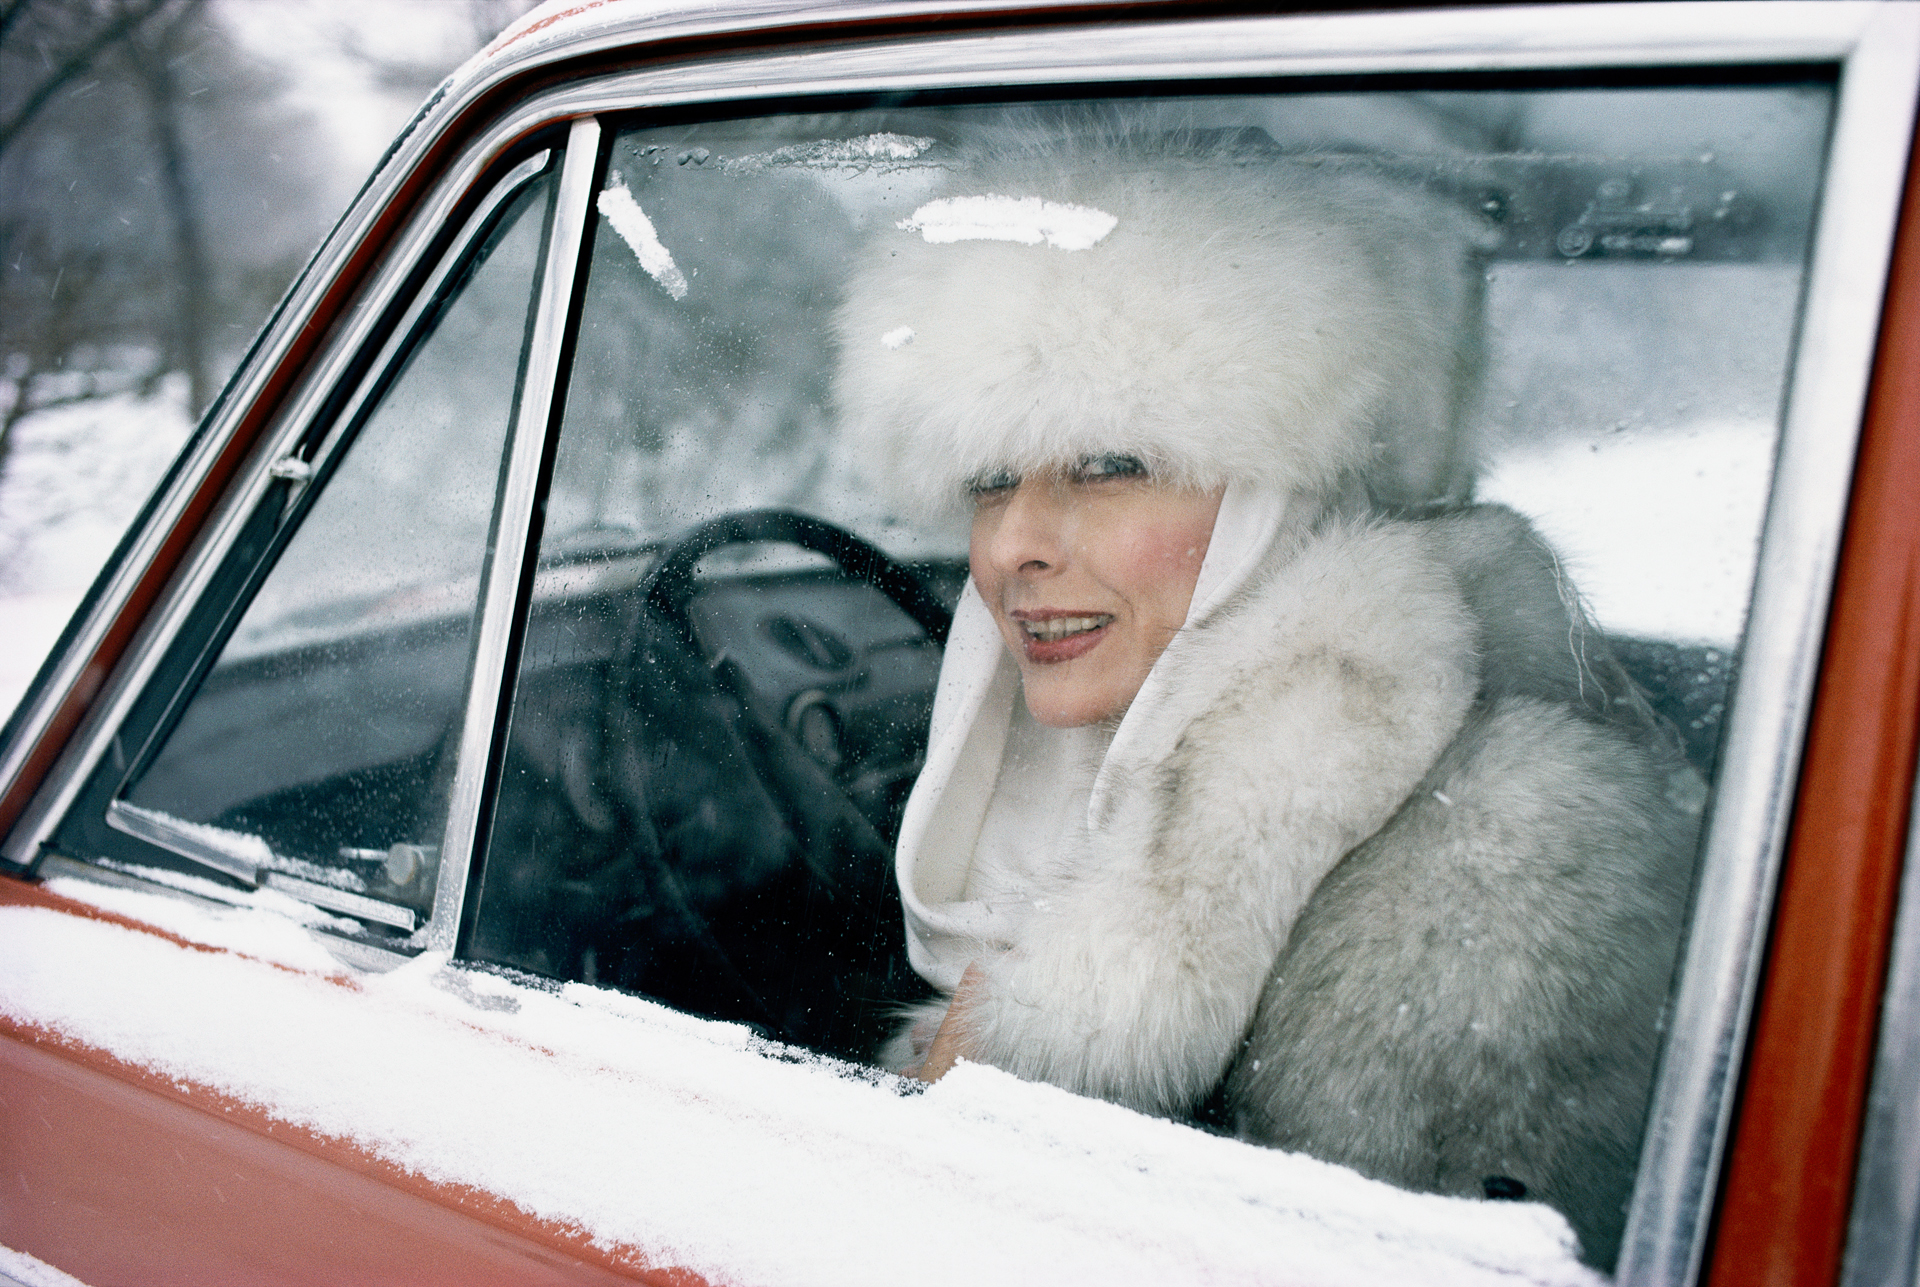  Renowned actress Anastasia Vertynskaya ranked among the few Russians privileged to own a new car in the late 1980s.  Moscow, Russia  